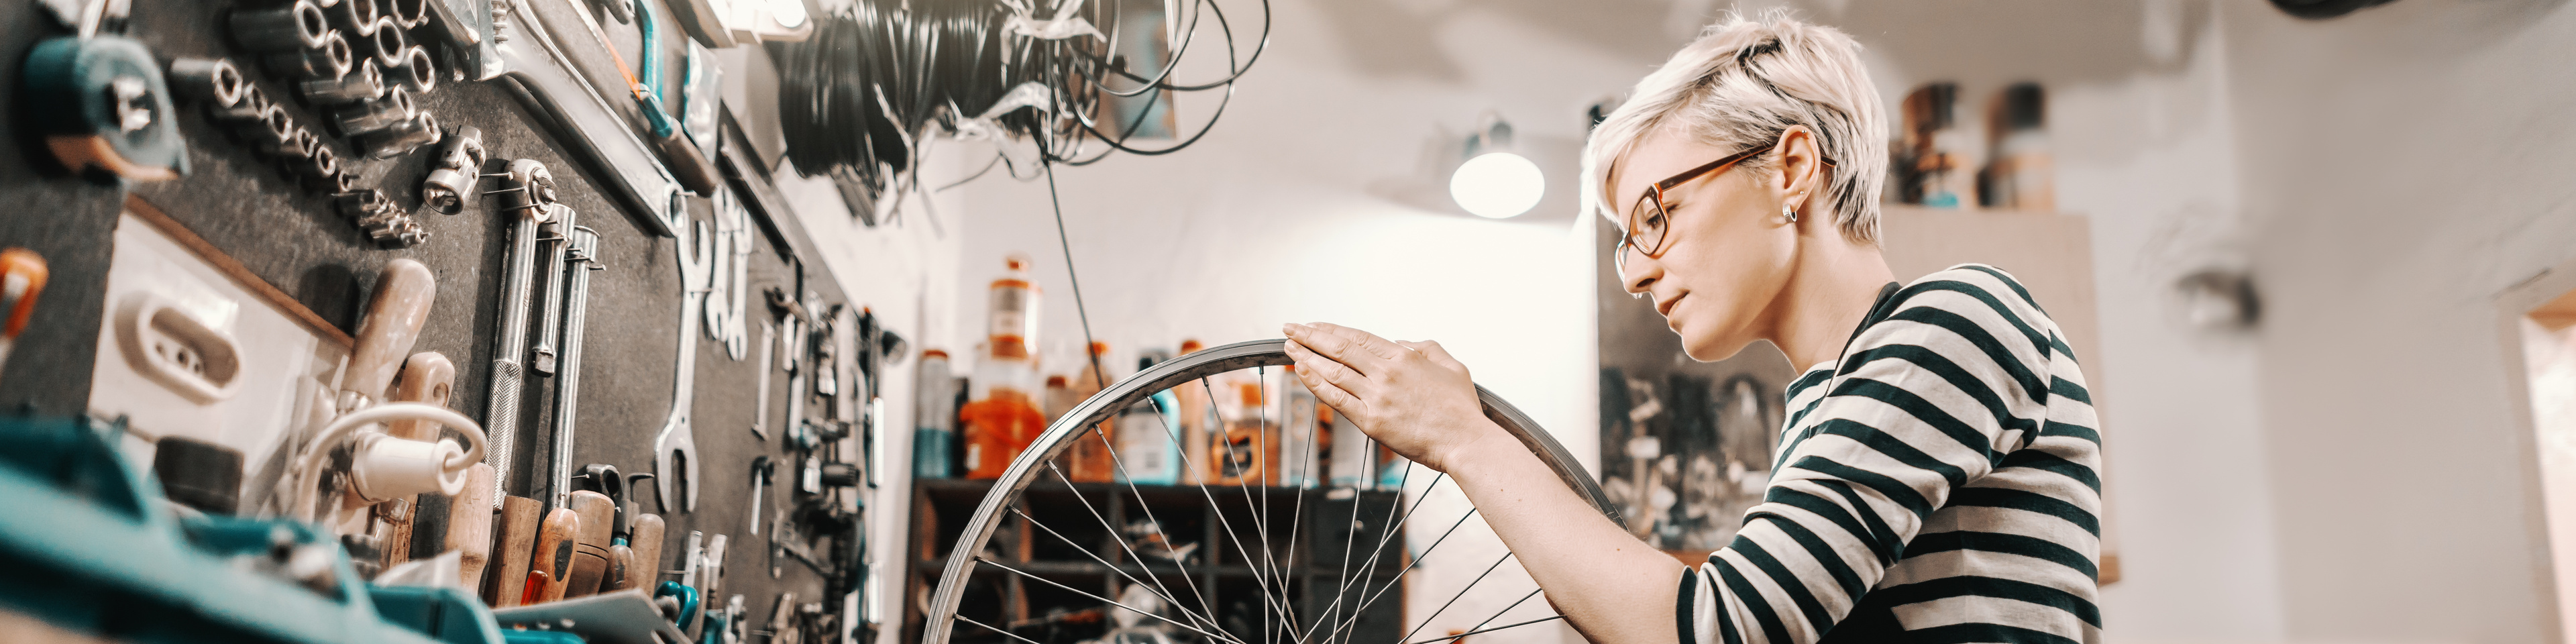 Female worker holding and repairing bicycle wheel while standing in bicycle workshop